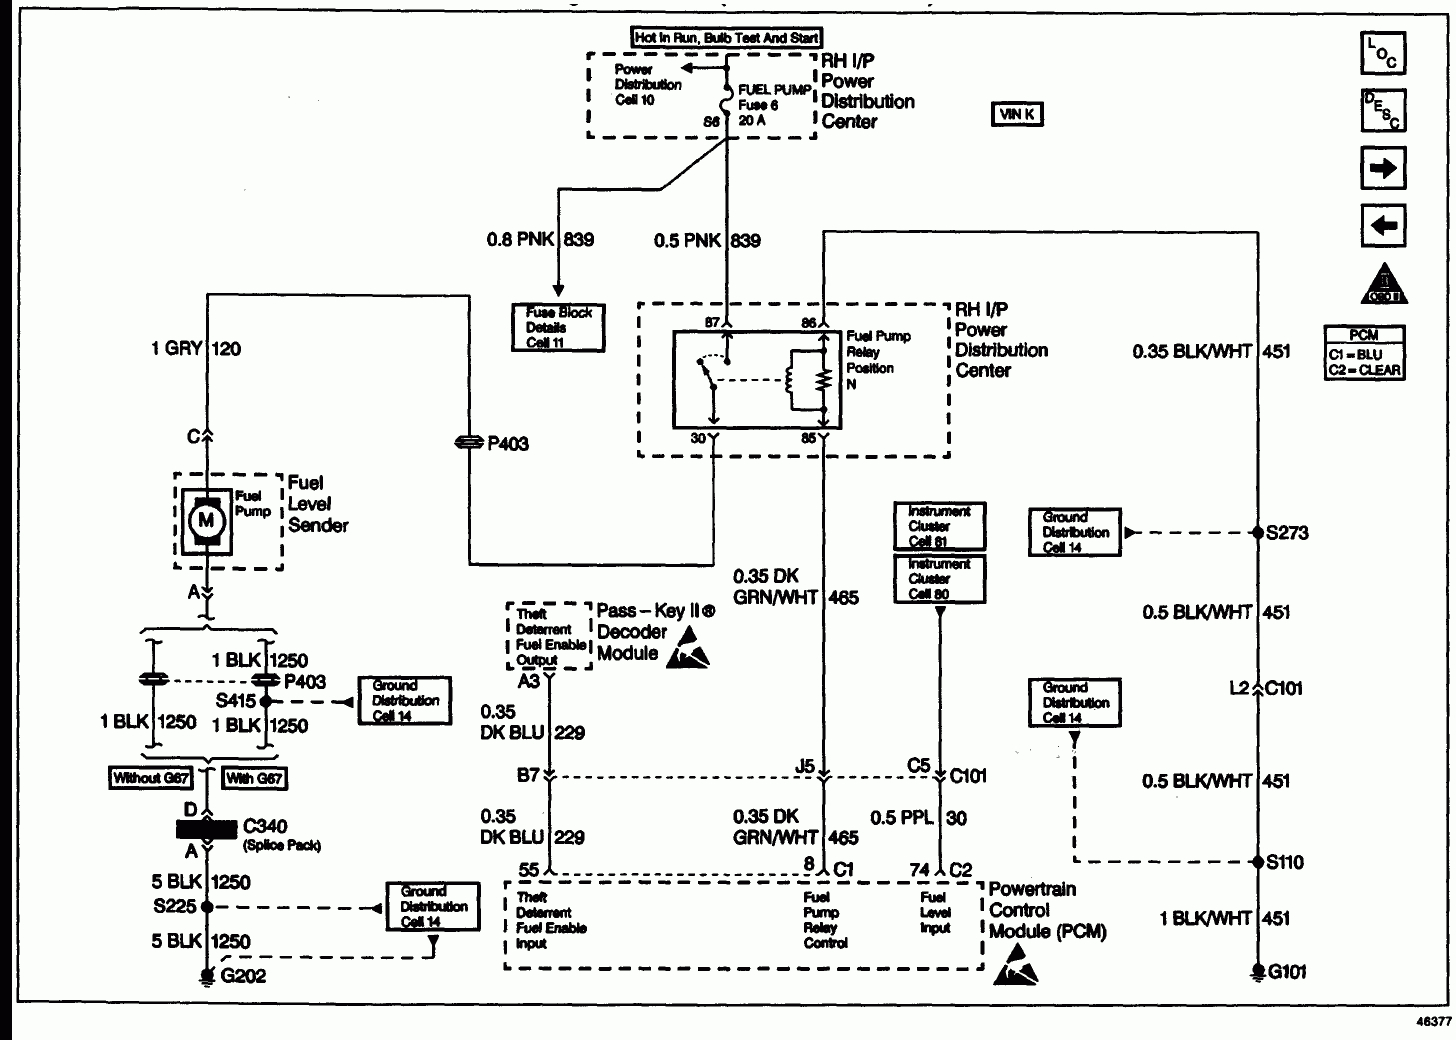 Wiring Diagram For An Electric Fuel Pump And Relay - Lorestan - Electric Fuel Pump Wiring Diagram